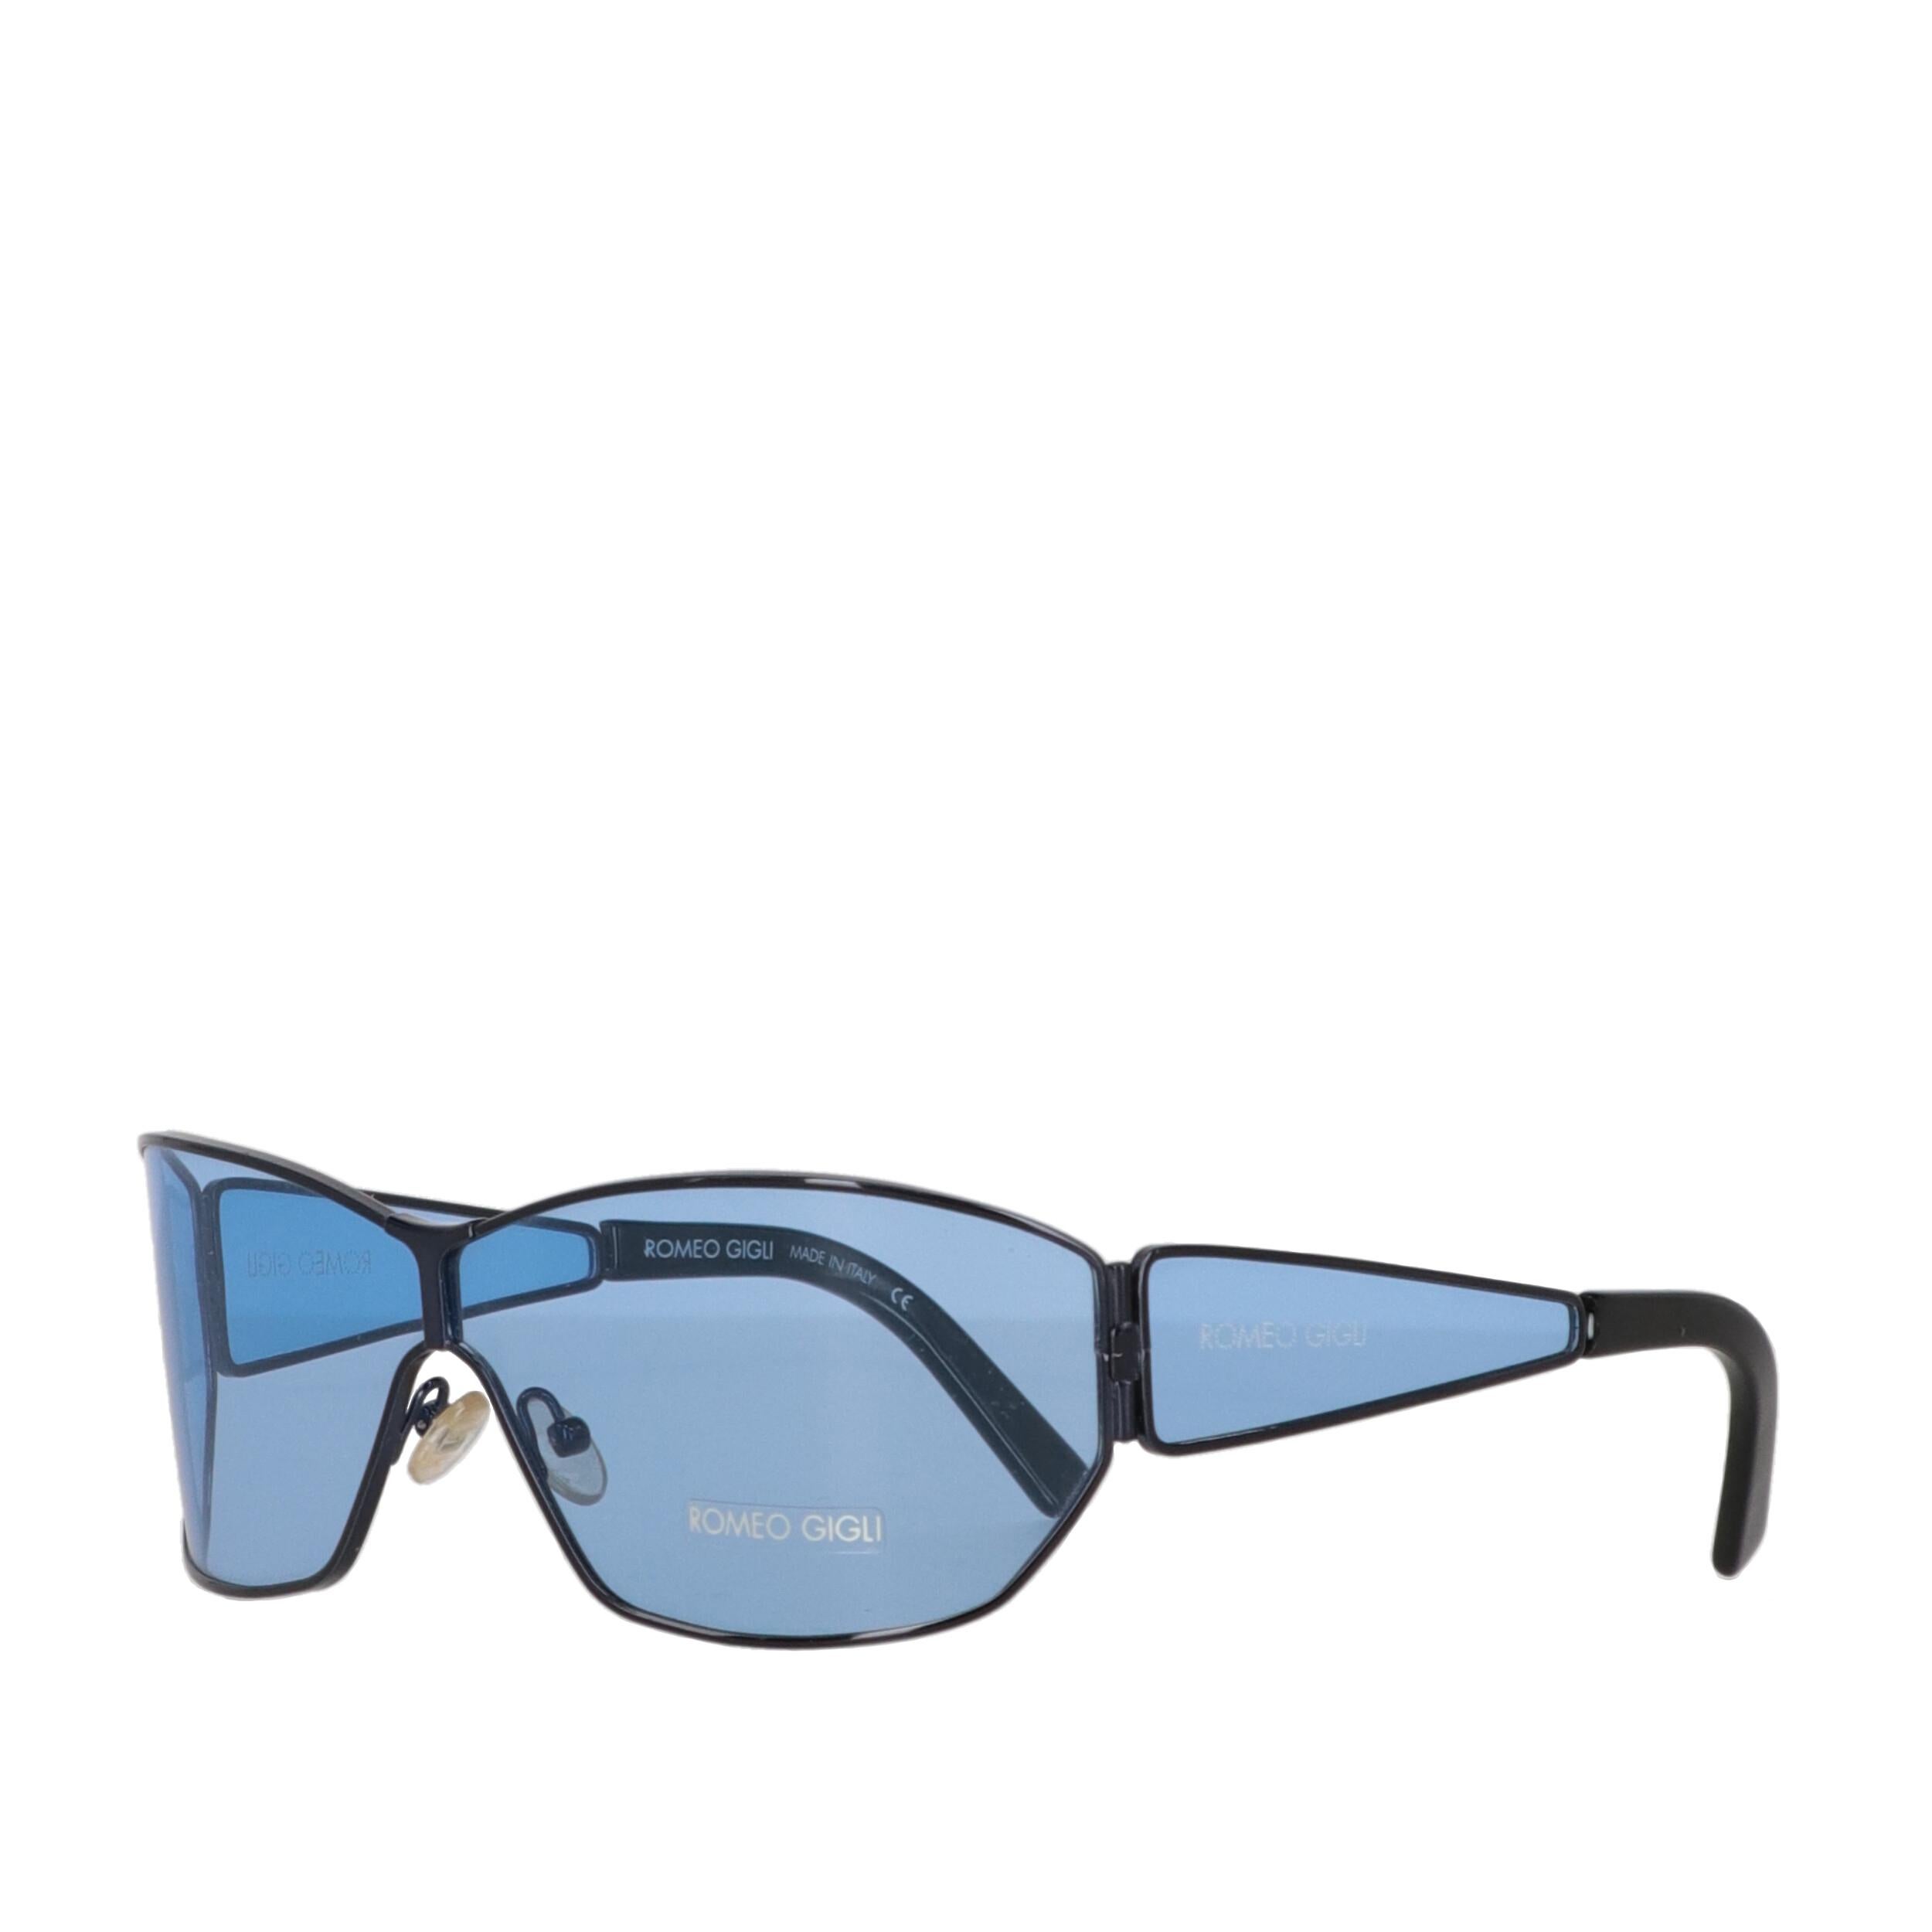 Romeo Gigli light blue sunglasses with dark-tone metal frame and wraparound curved lenses.
Please note, this item cannot be shipped to the US.

Years: 90s
Made in Italy

Width: 14,5 cm
Height: 4,5 cm